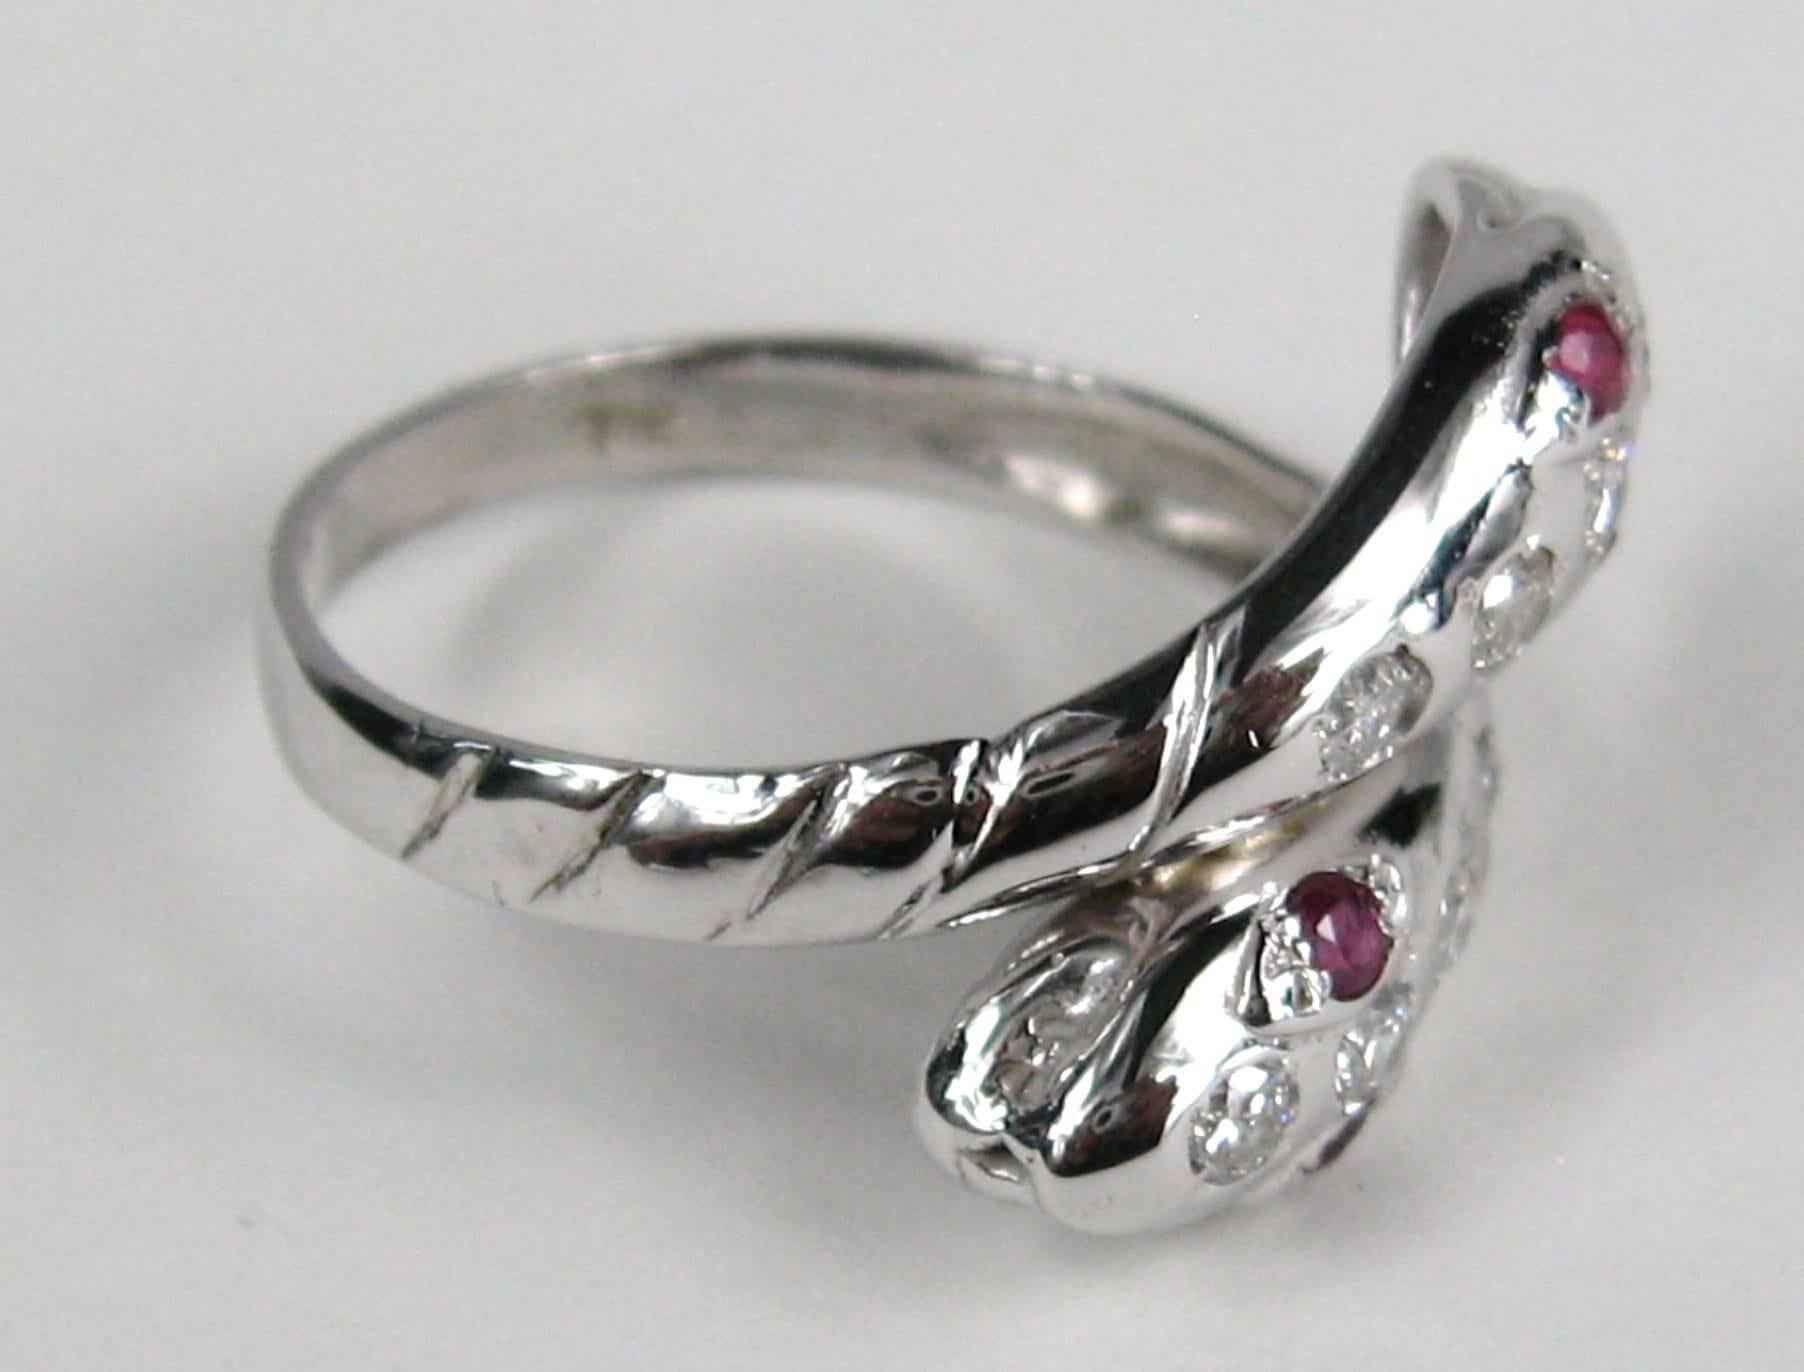 Double Headed Snake Wedding 14K Ring with 4 bezel set diamonds in each head. Rubies make up the eyes of both snakes. Ring is hallmarked inside shank. This can be worn by either a man or woman. The ring is about a 6-3/4 and can be sized by us or your